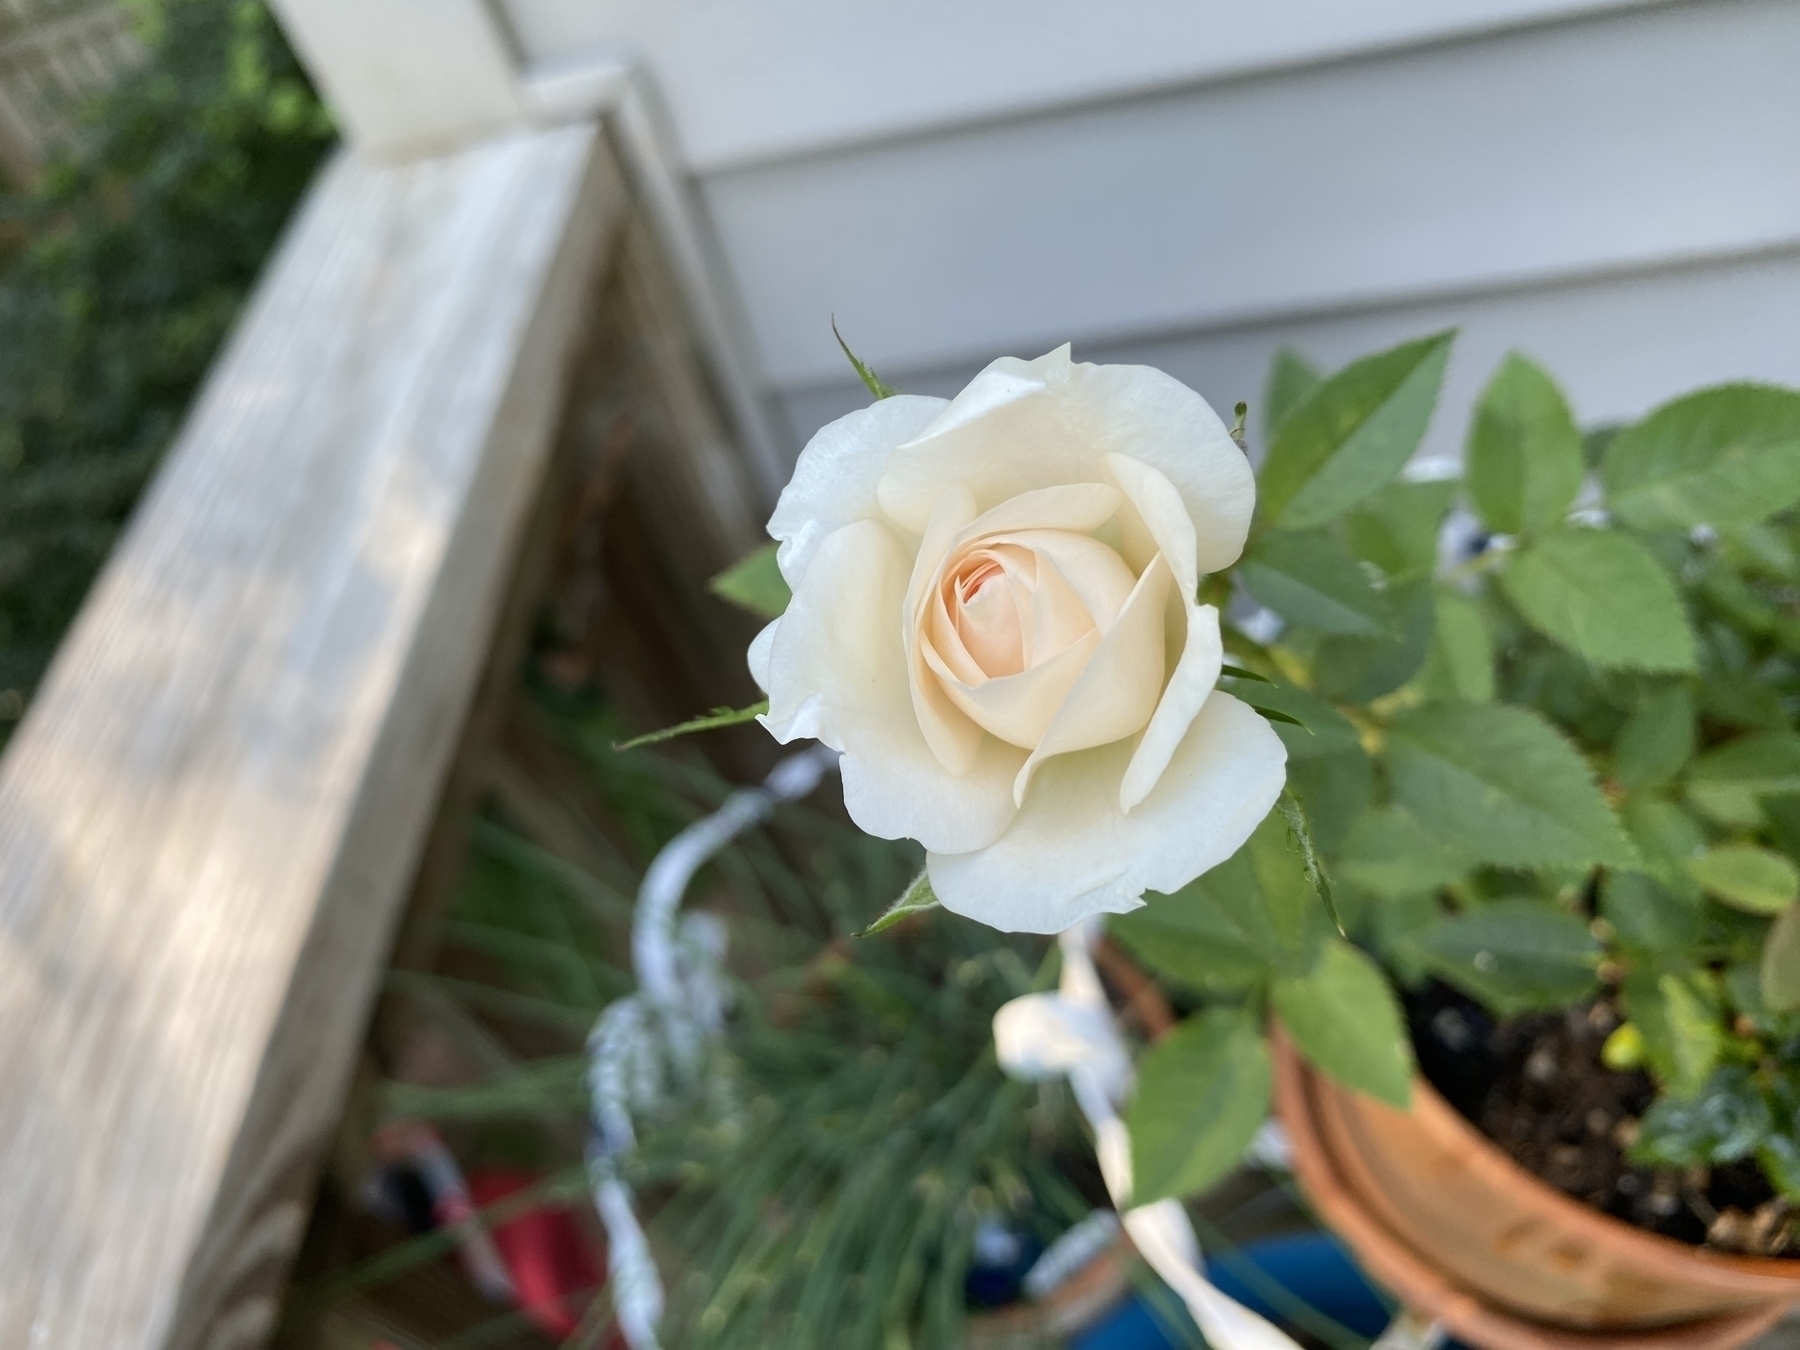 A white and light peach colored rose